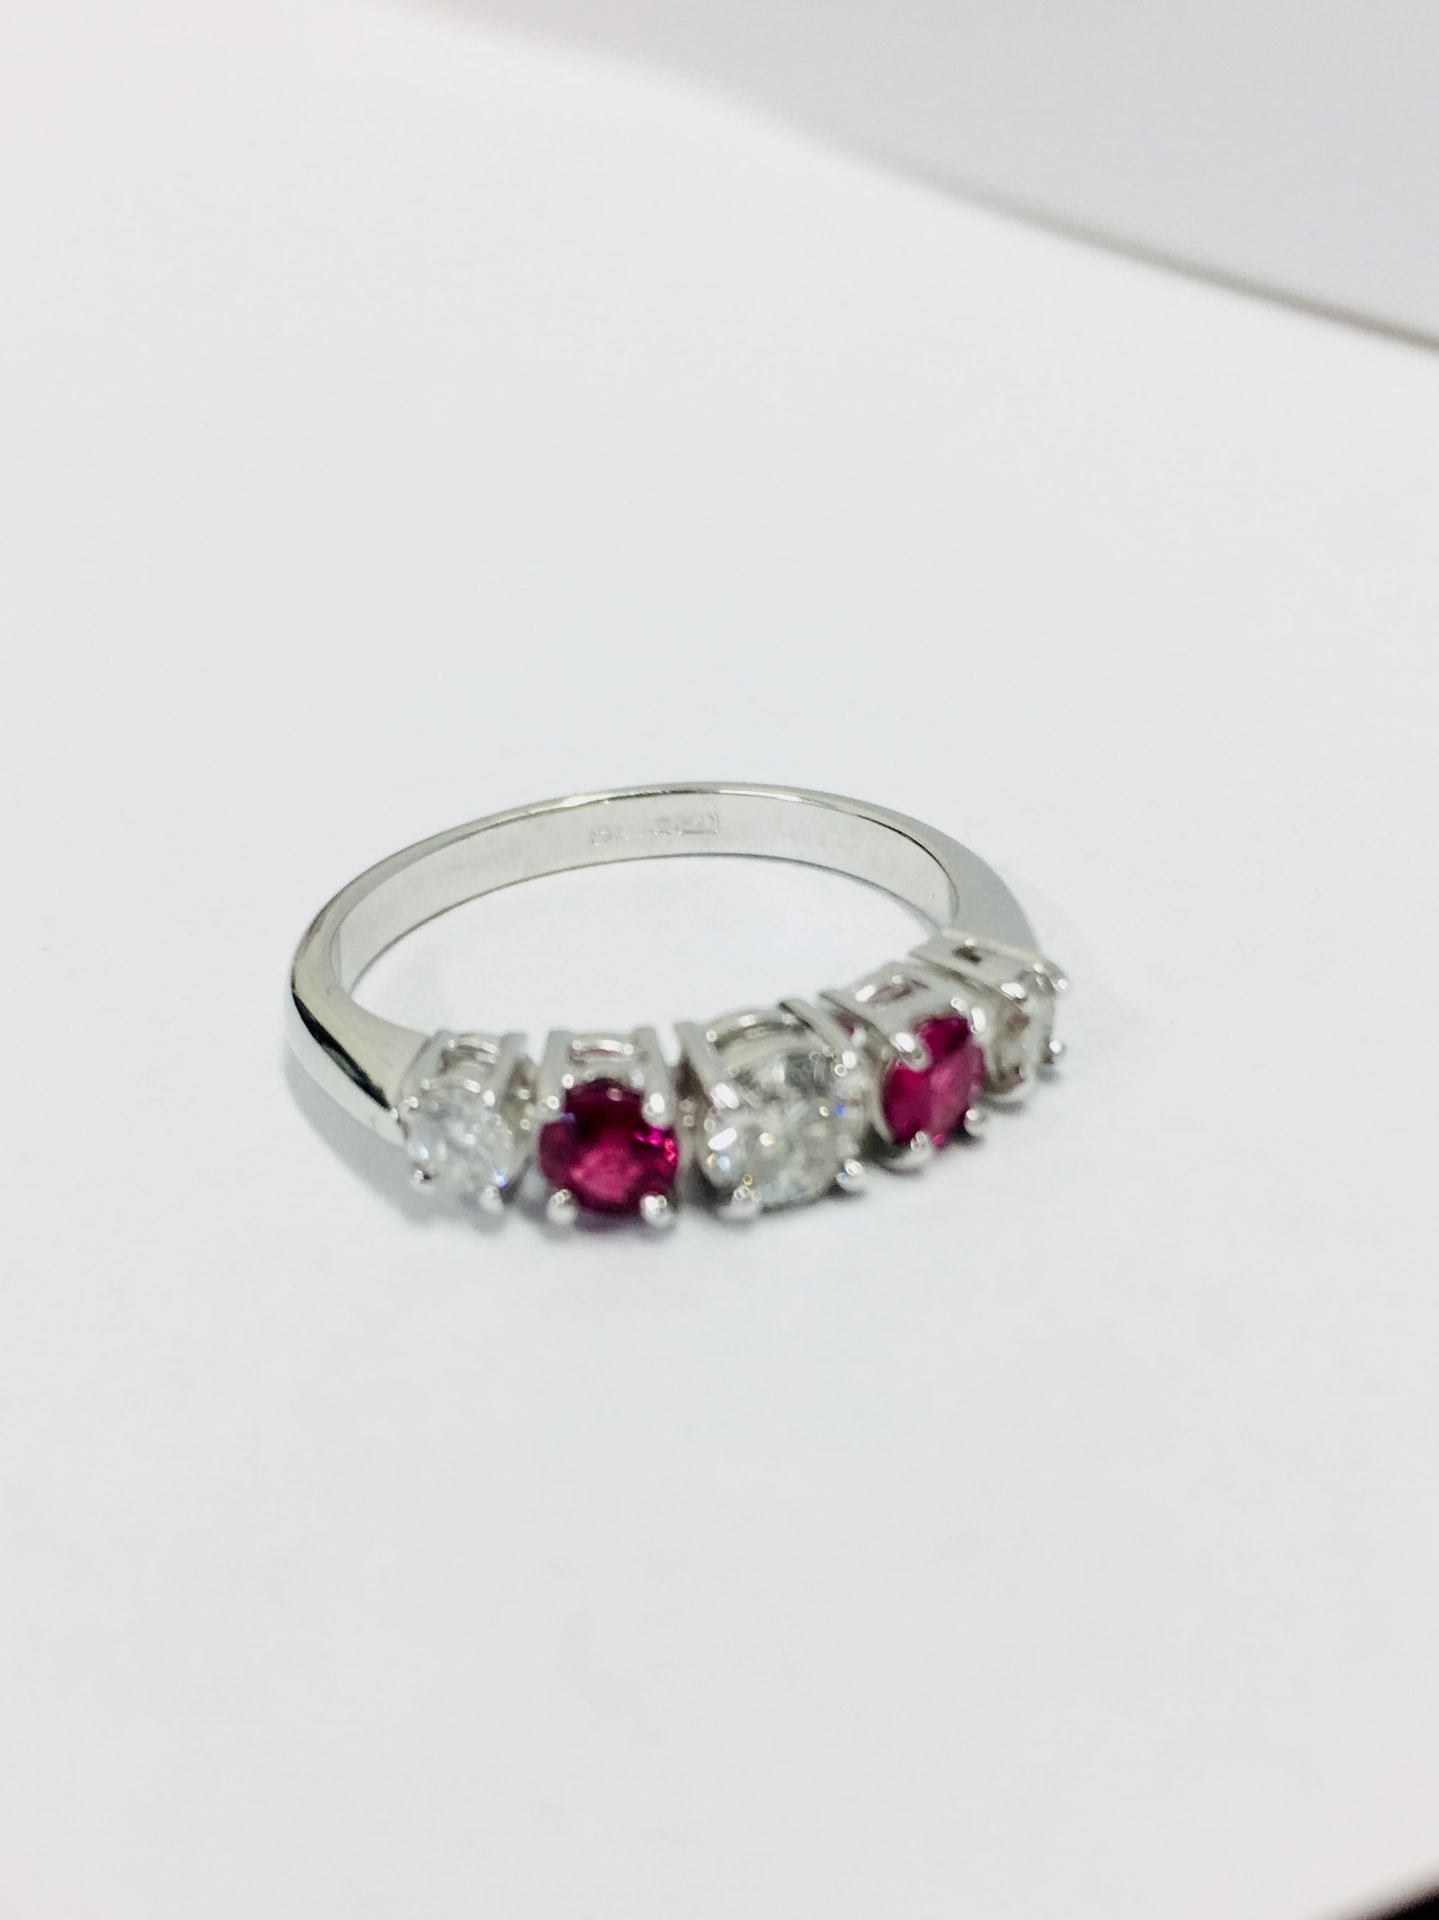 0.75ct ruby and diamond five stone ringset in 18ct gold. 2 rubies( treated ) 3 brilliant cut - Image 4 of 4